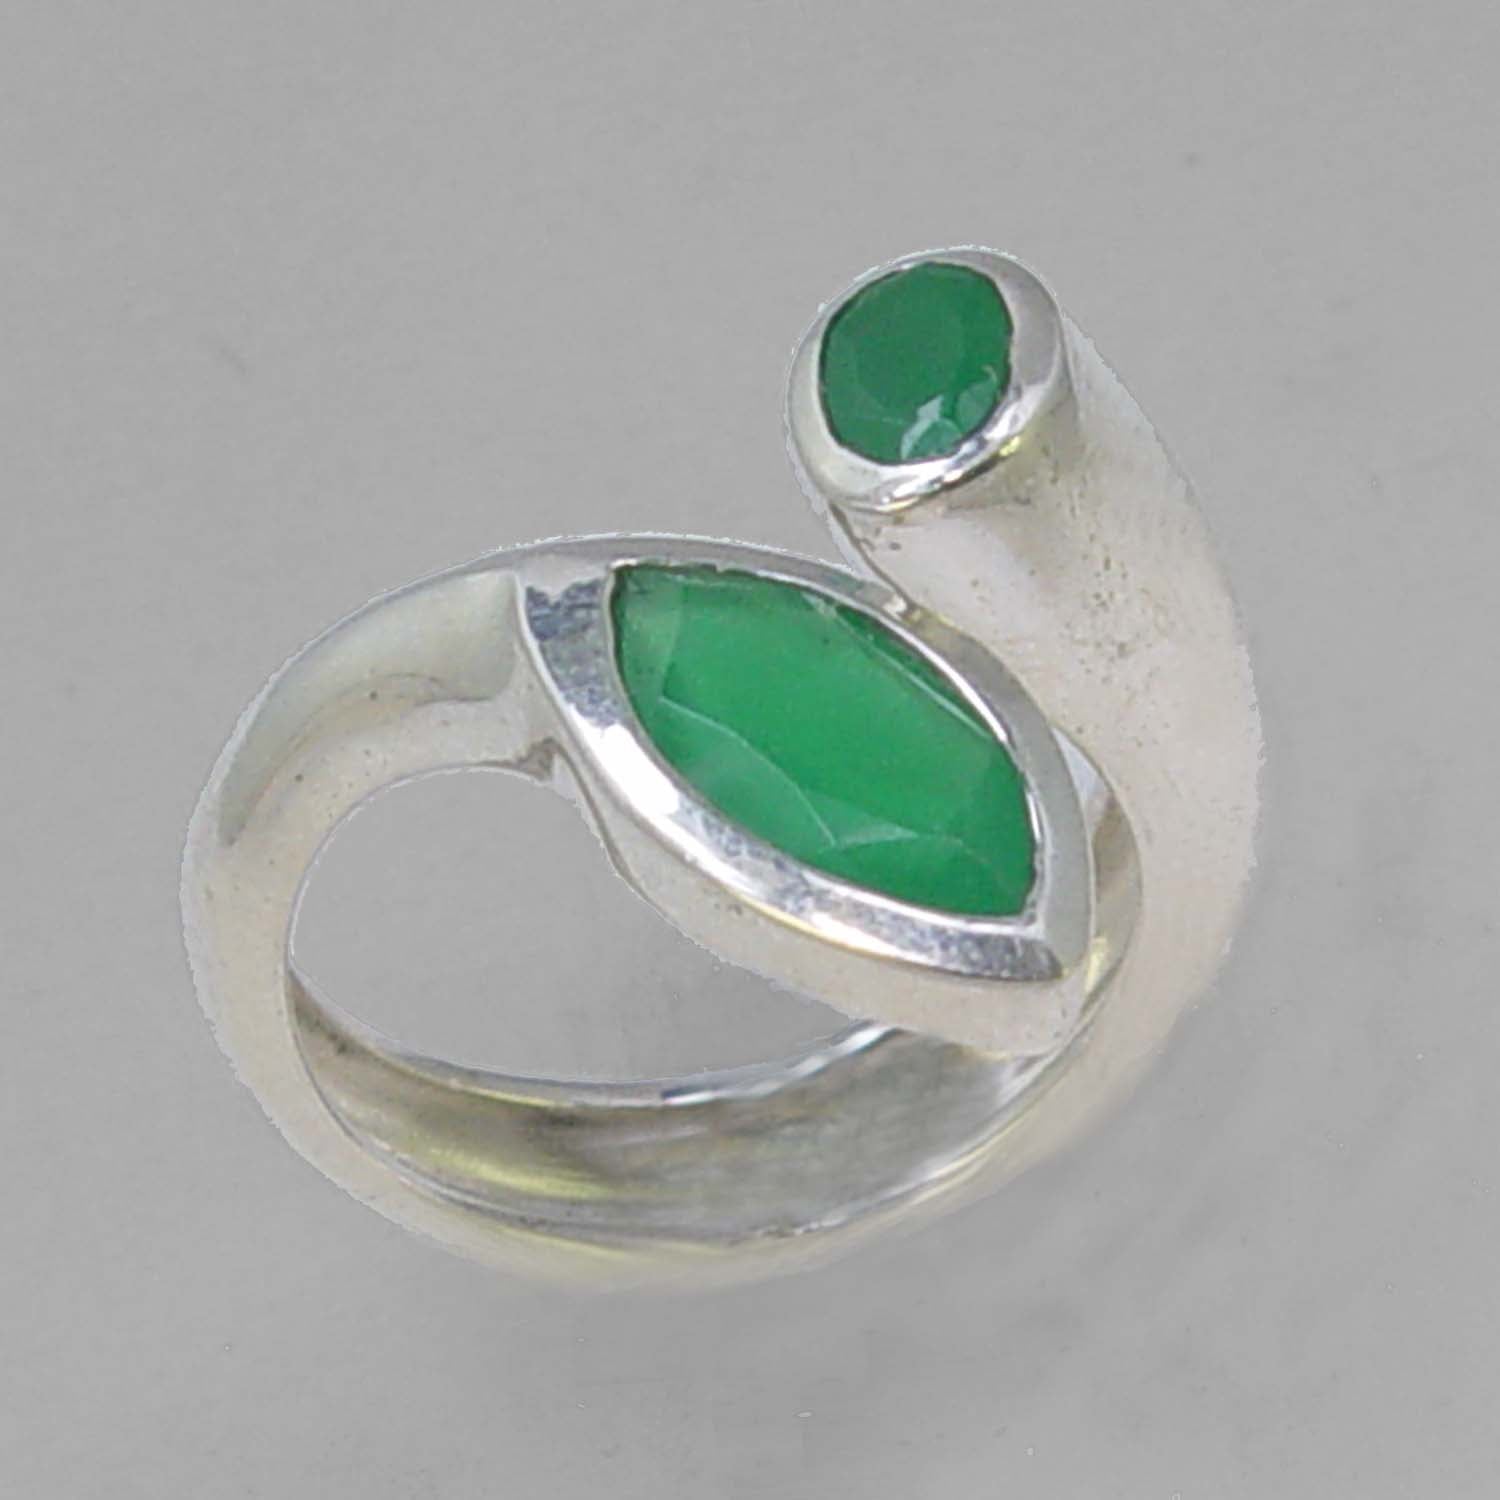 Emerald 2.0 CT Marquise Bezel Set Sterling Silver Offset Ring, Size 8, Adjustable Overlapping Band